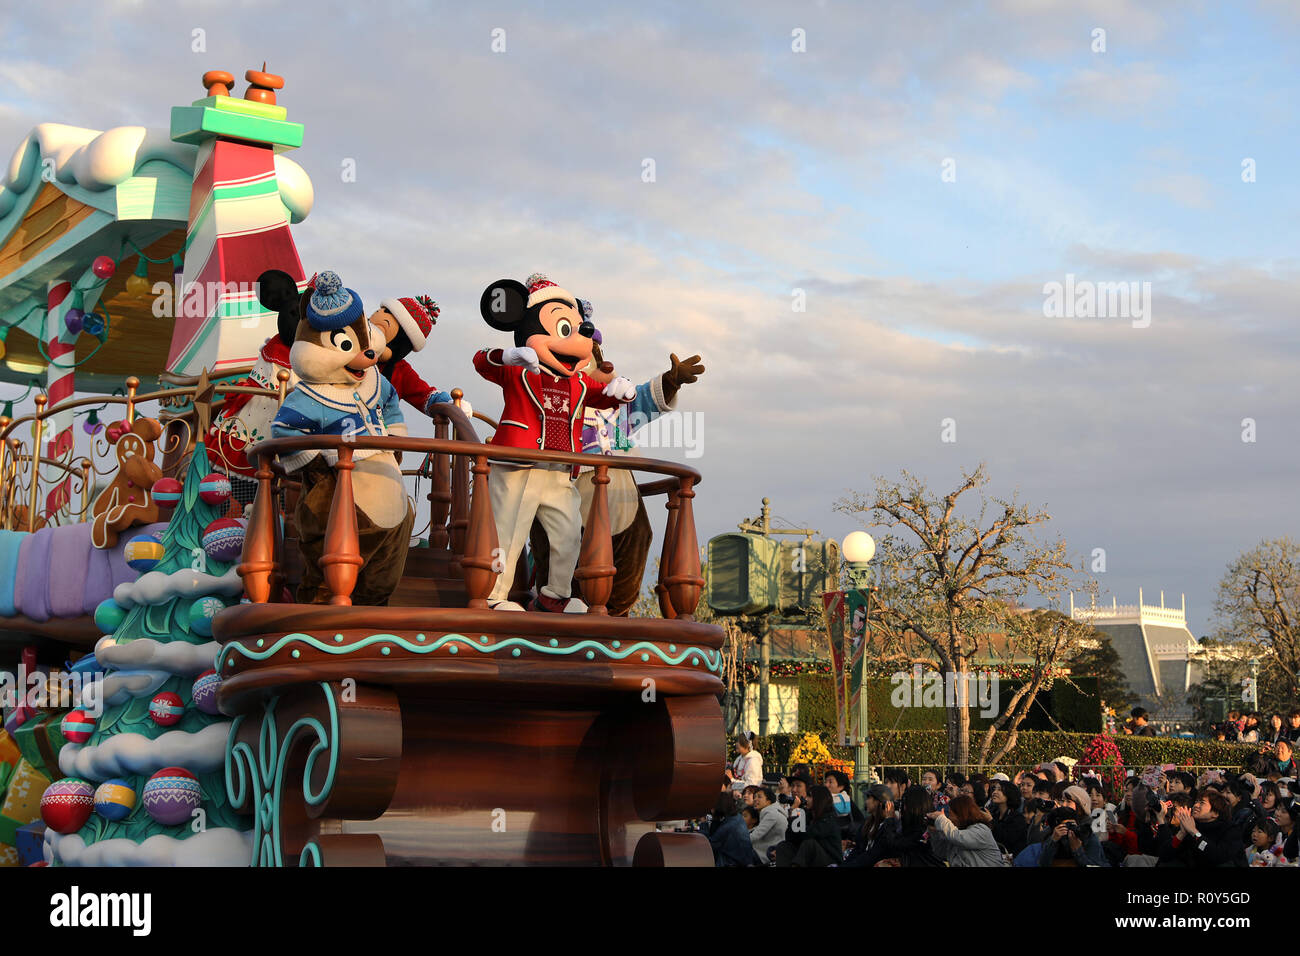 (181107) -- CHIBA, Nov. 7, 2018 (Xinhua) -- Disney characters wave to guests on a float during the Christmas parade at Tokyo Disneyland in Chiba, Japan, on Nov. 7, 2018. (Xinhua/Du Xiaoyi) (psw) Stock Photo